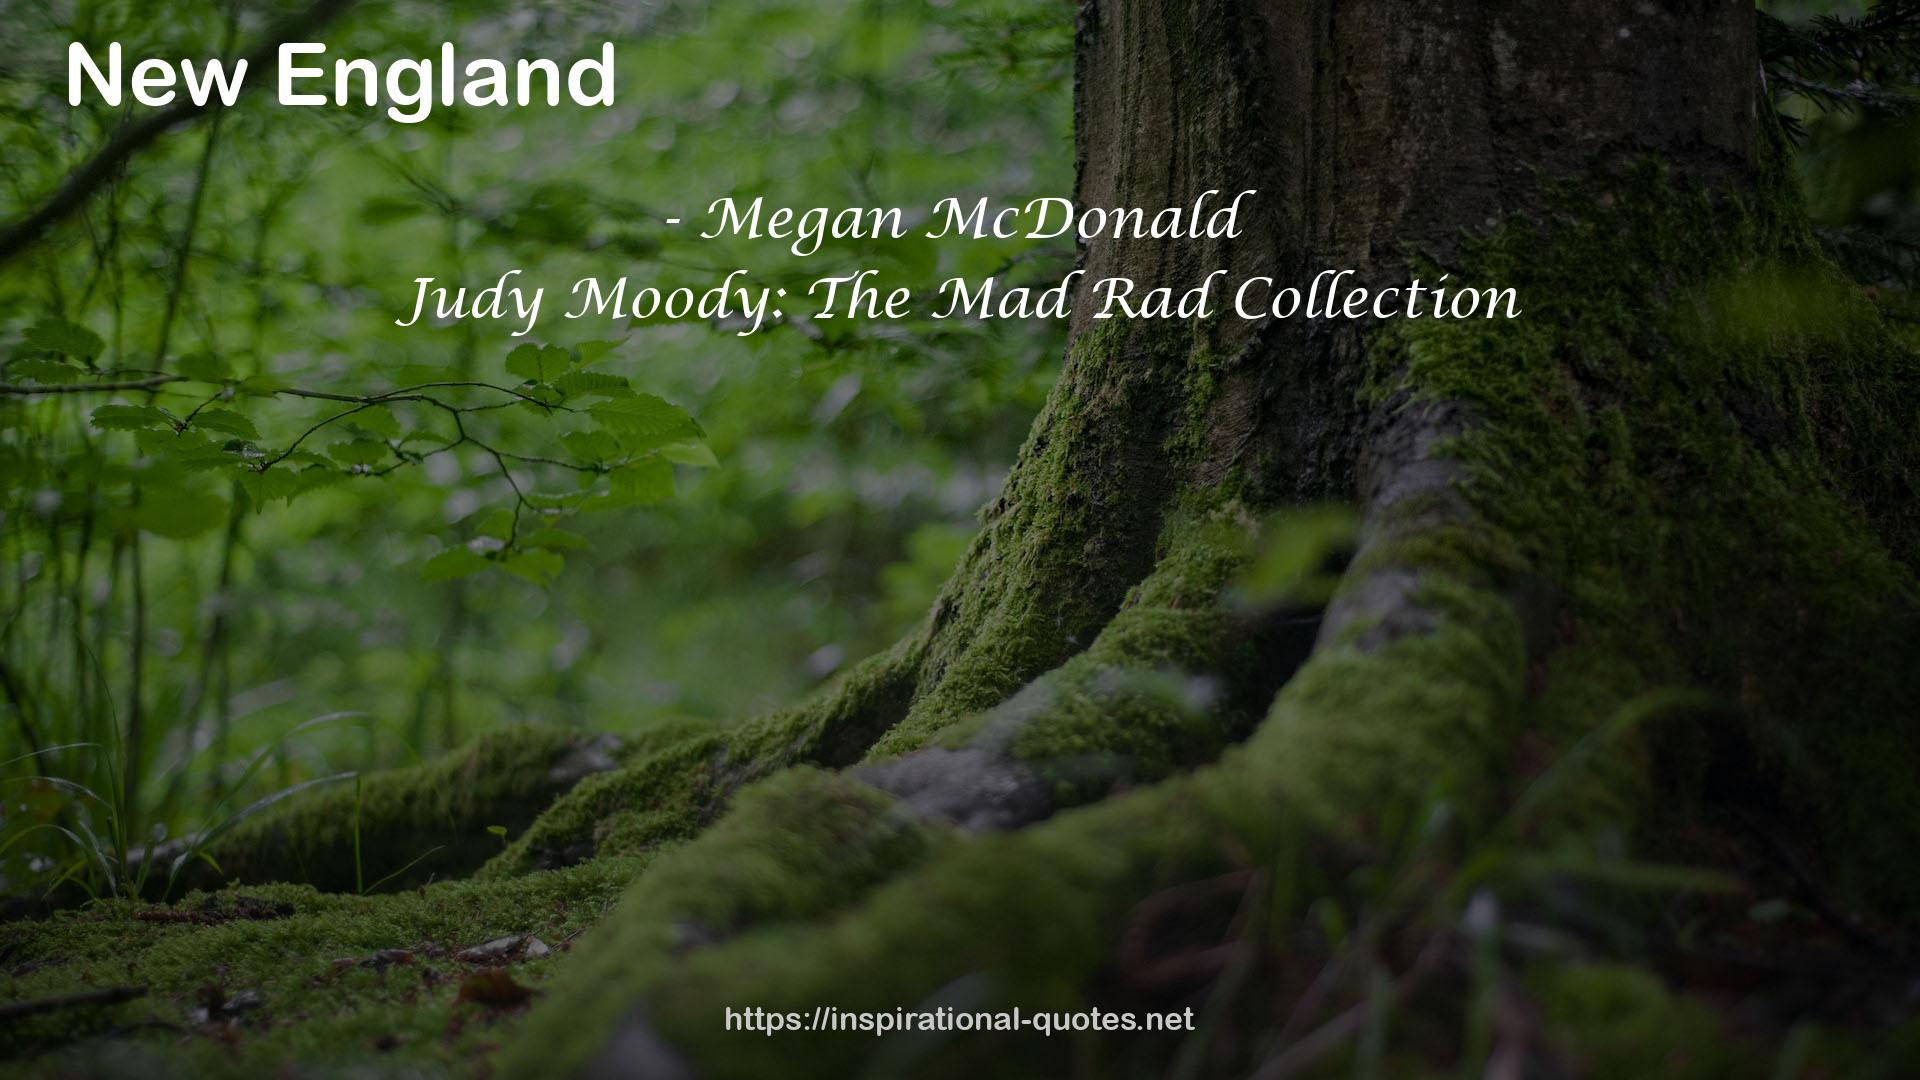 Judy Moody: The Mad Rad Collection QUOTES